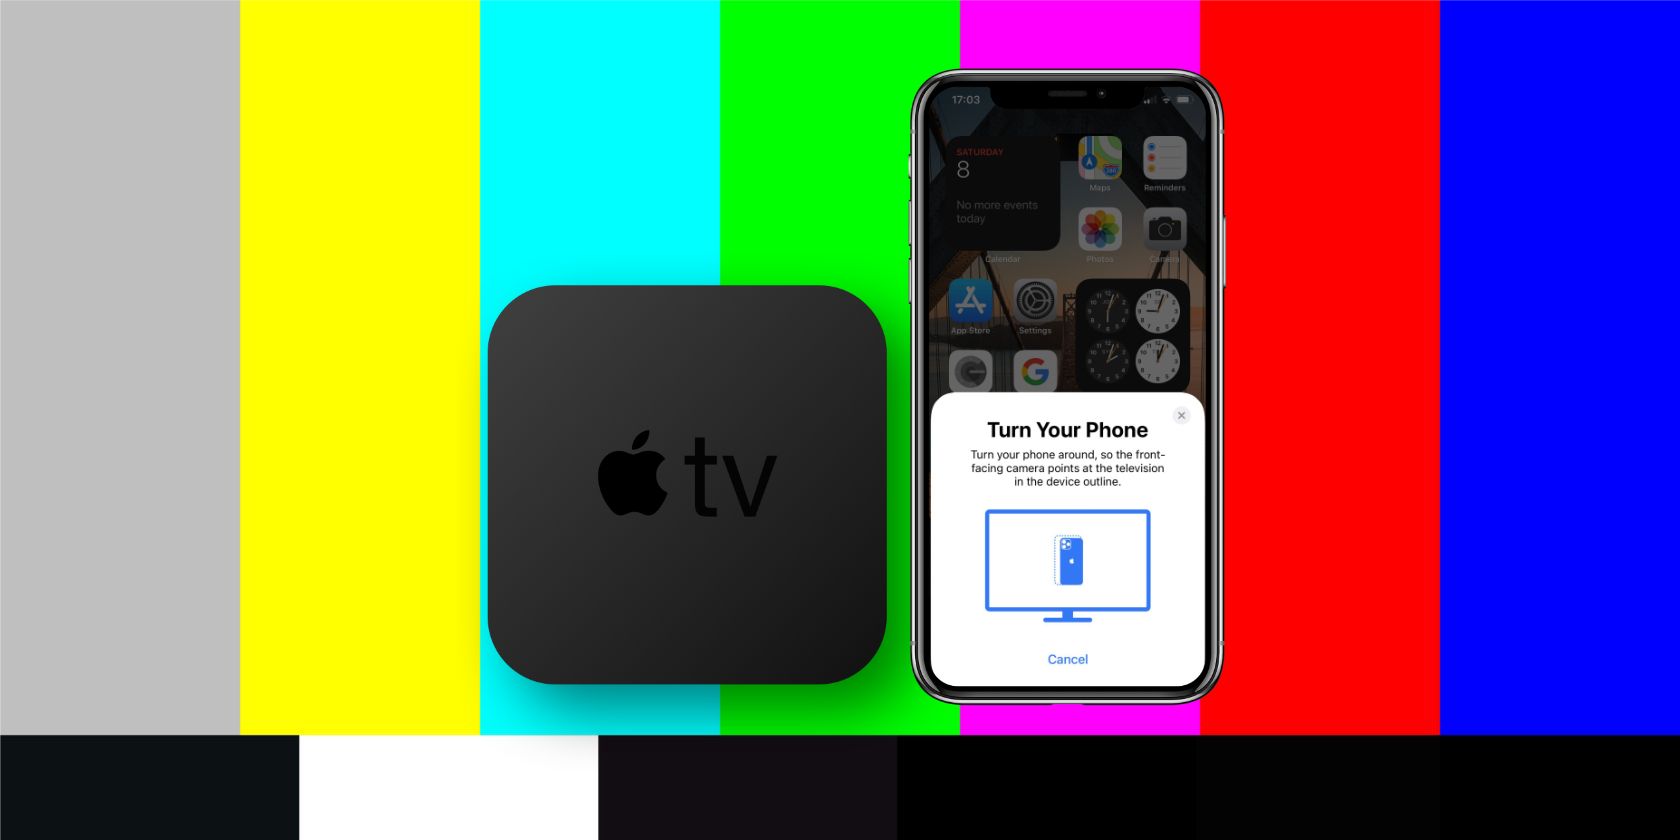 An Apple TV and iPhone during the calibration process in front of a traditional screen calibration background.